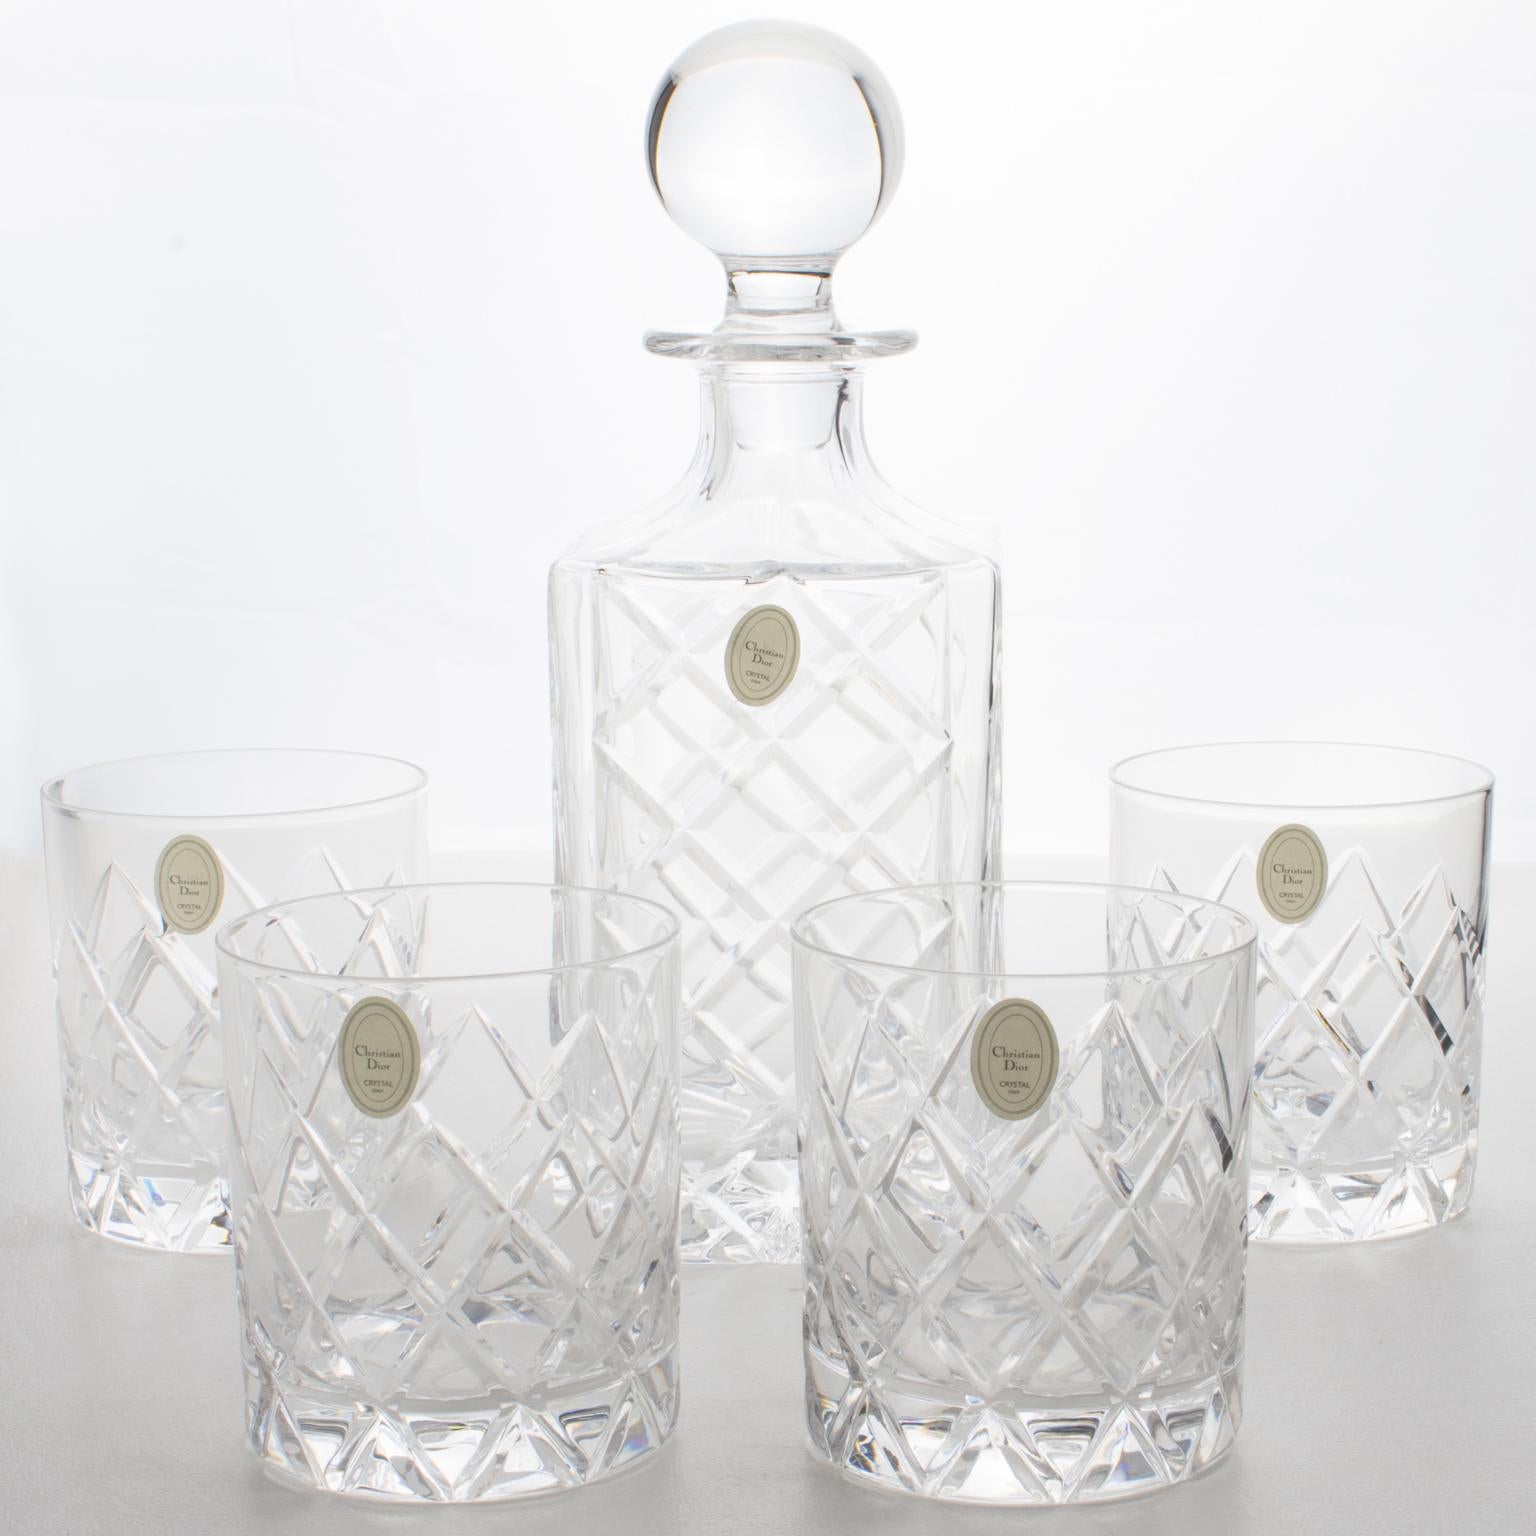 Christian Dior Crystal Decanter and Glasses Set, 5 pieces in Original Box, 1980s 10